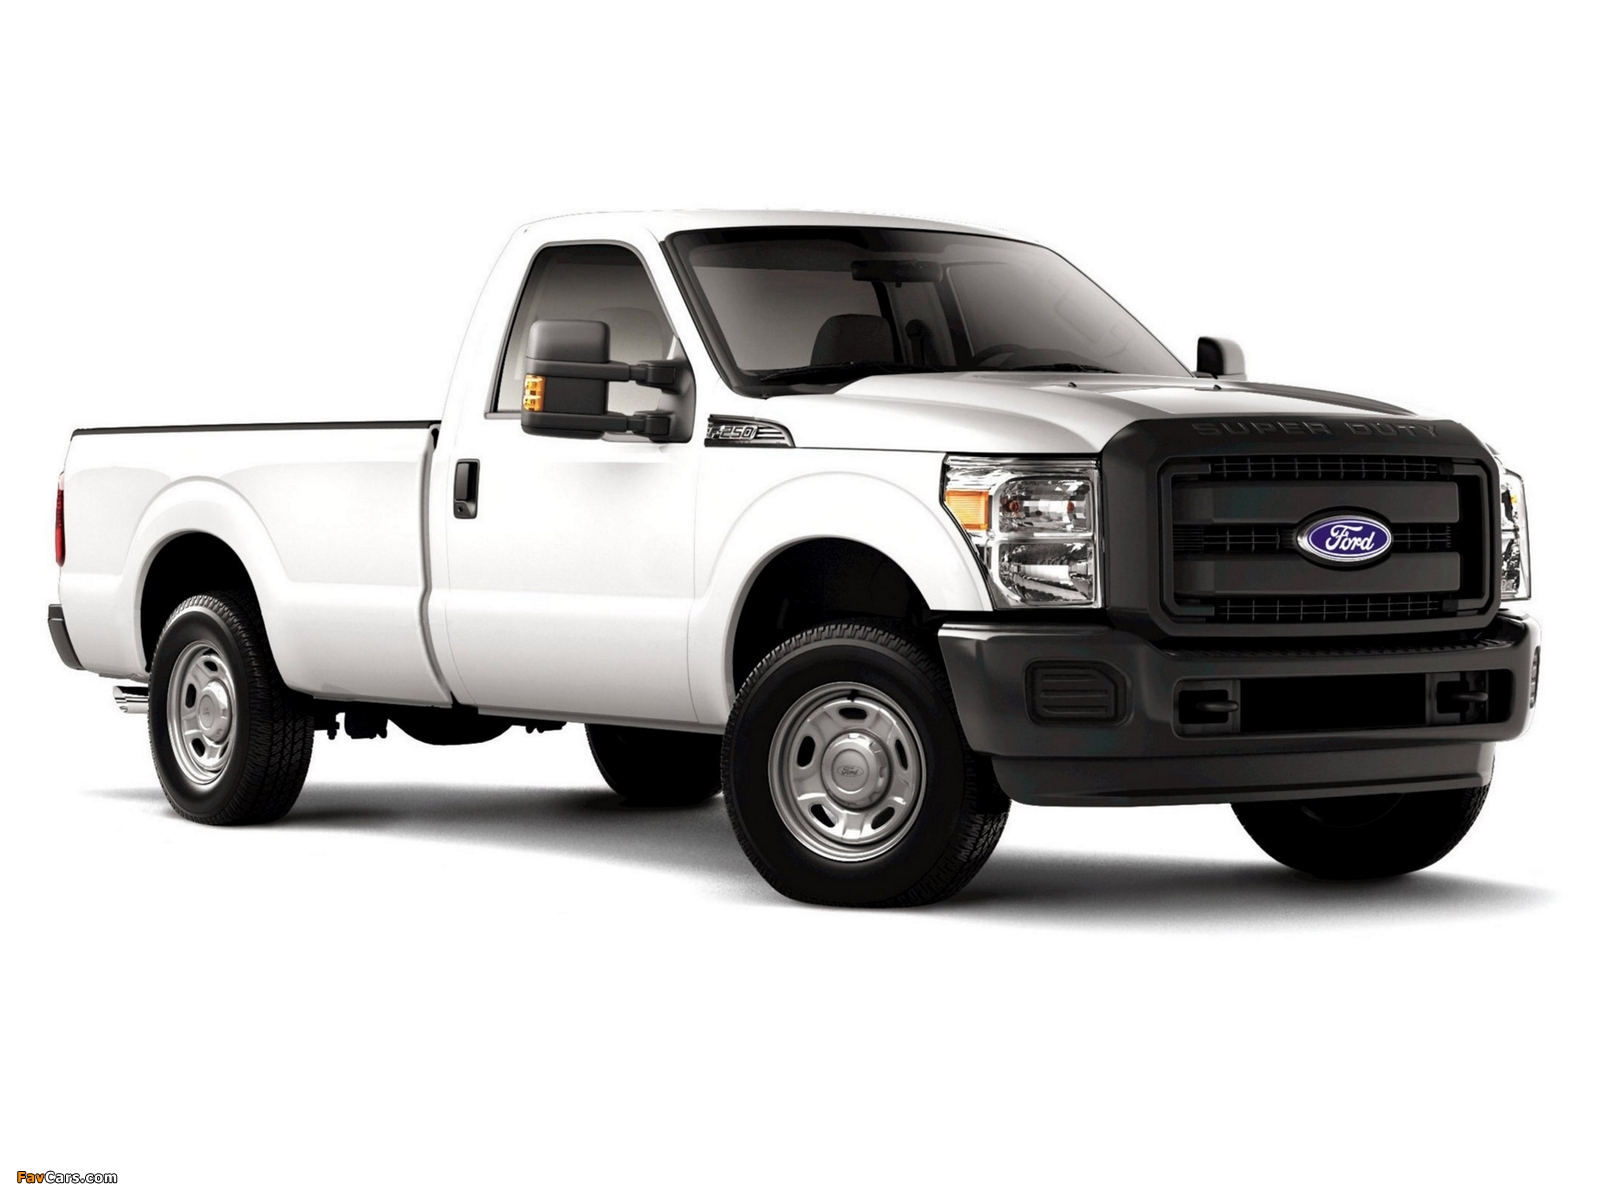 Ford F-250 Super Duty Regular Cab 2010 pictures (1600 x 1200)